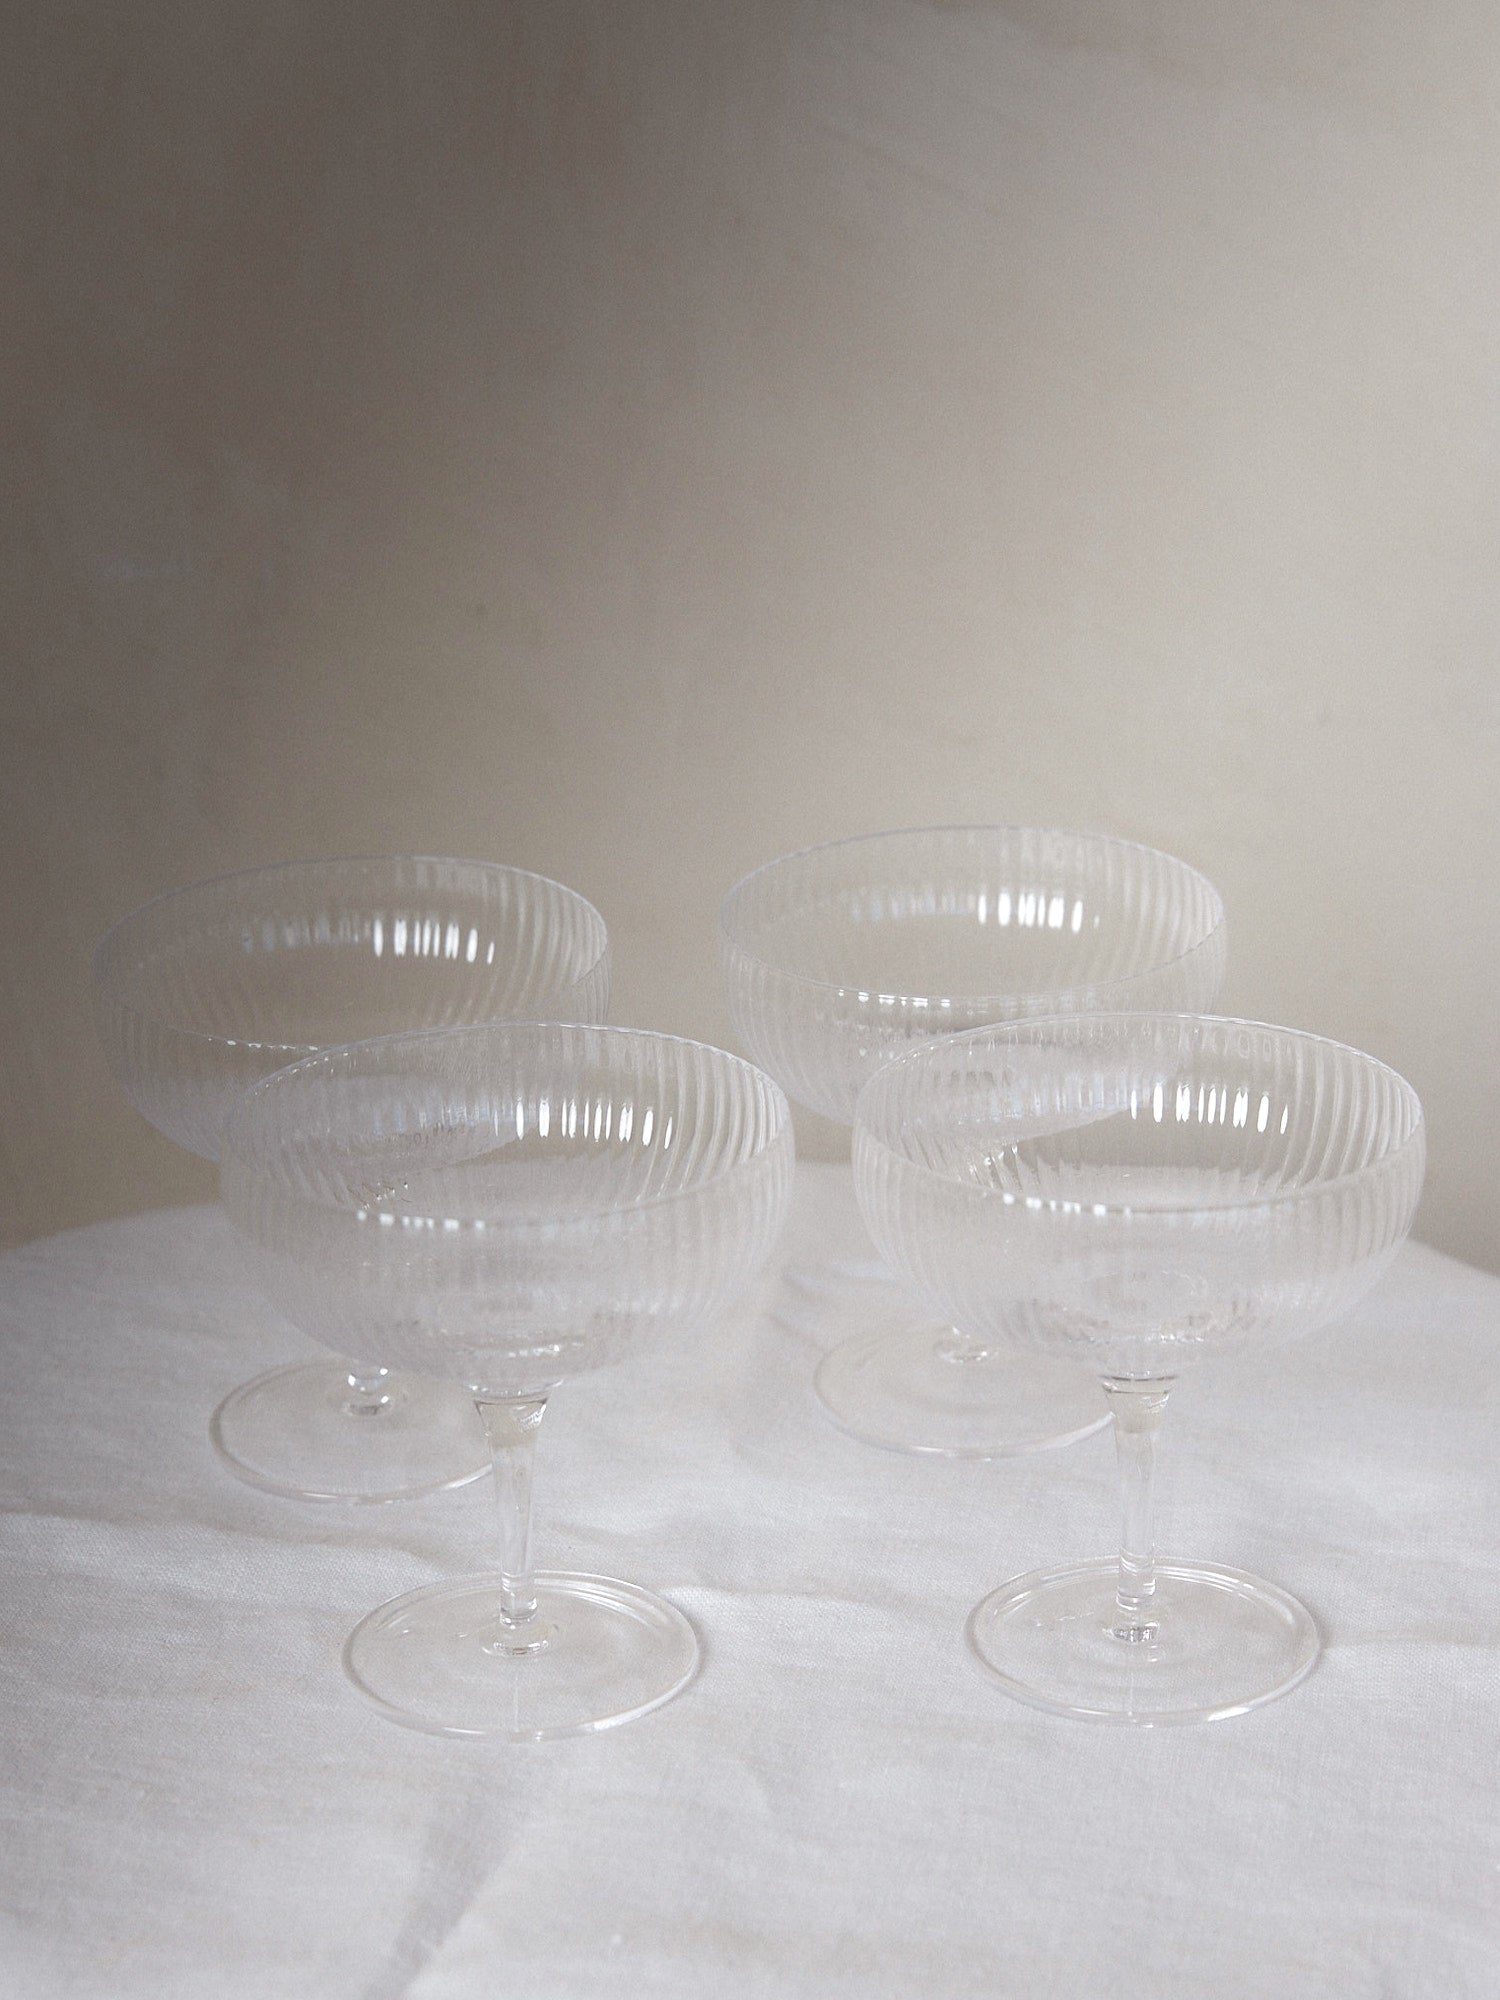 Champagne Coupe Set/4. Unique find. Special edition set of ribbed champagne glasses designed by famed Michelin star chef and restauranteur, Sergio Herman, featuring delicate, tender folds fading to the edge of the glass. 